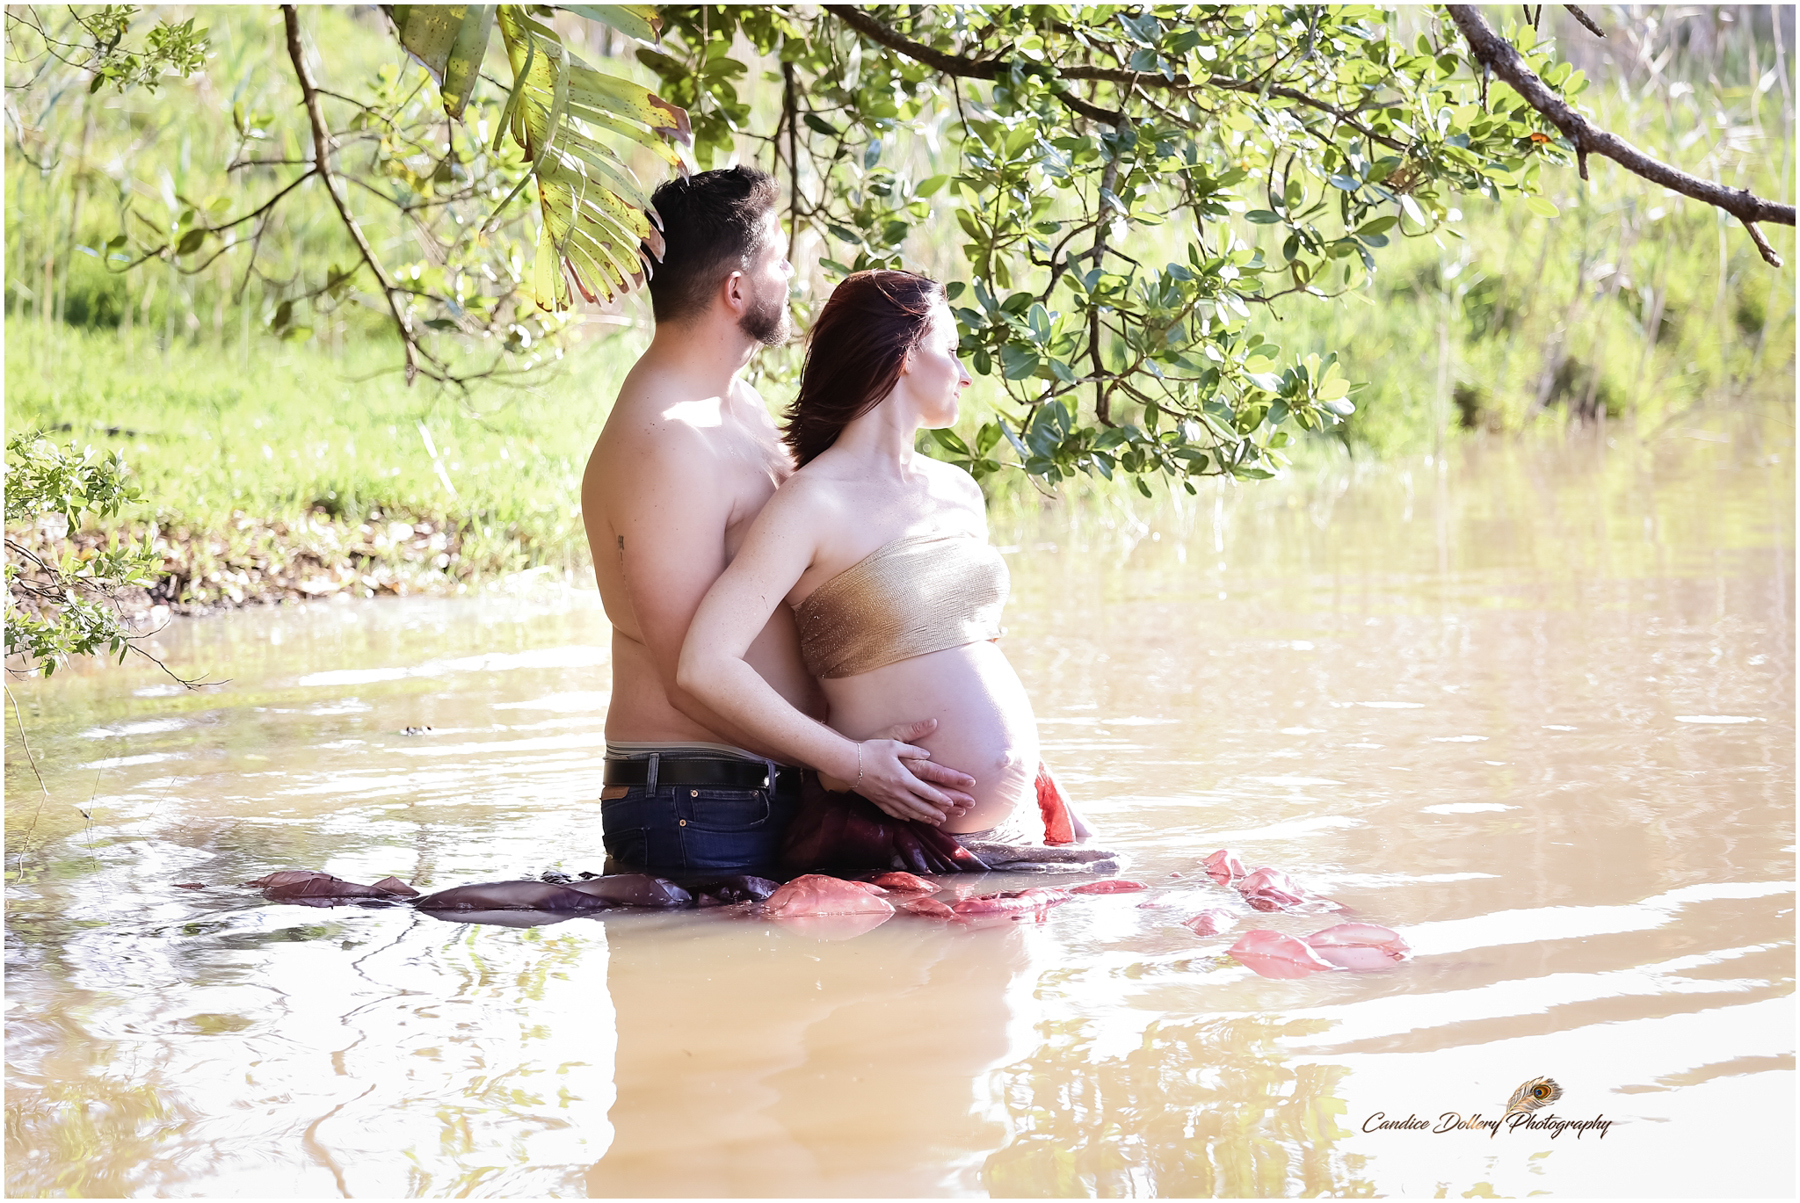 kirstys-maternity-candice-dollery-photography_1815